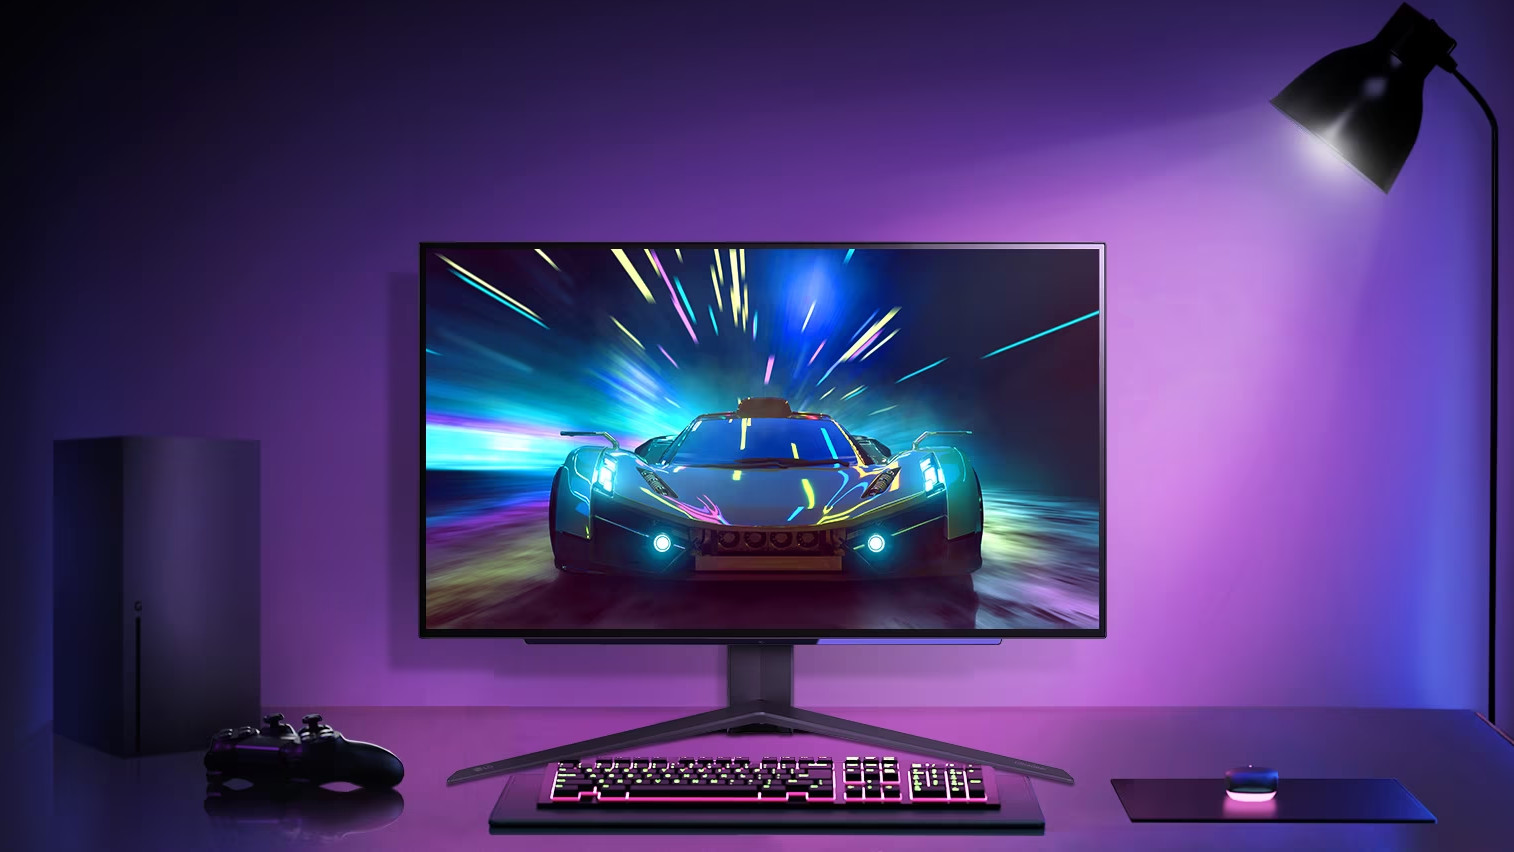 LG finally clarifies whether its warranty covers OLED burn-in on gaming  monitors – and it's good news